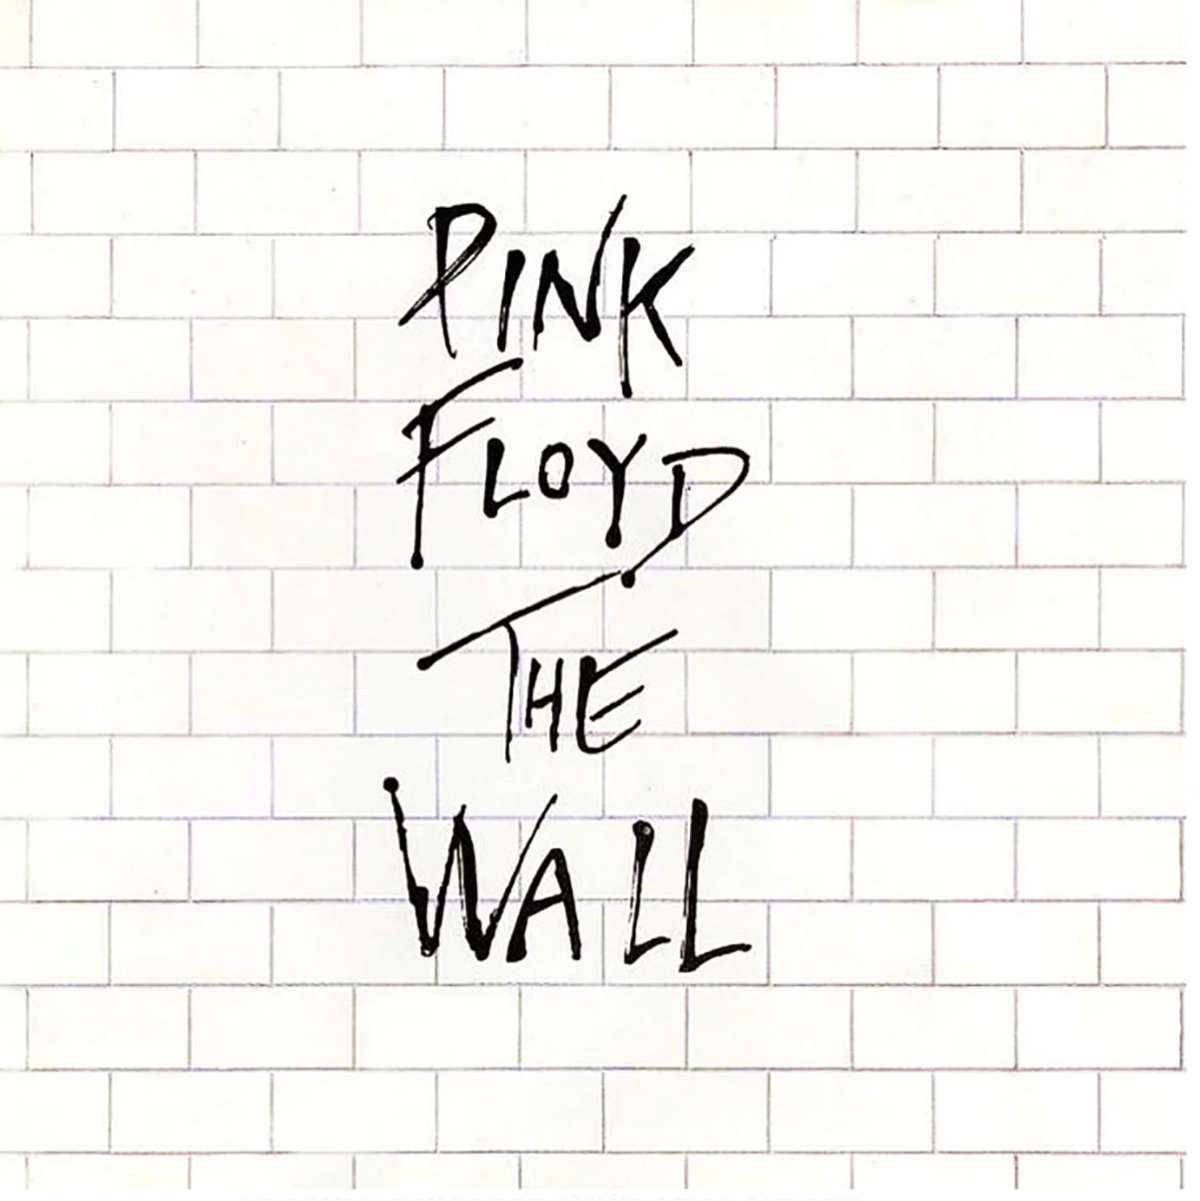 oblozhka singla another brick in the wall pink floyd 1979